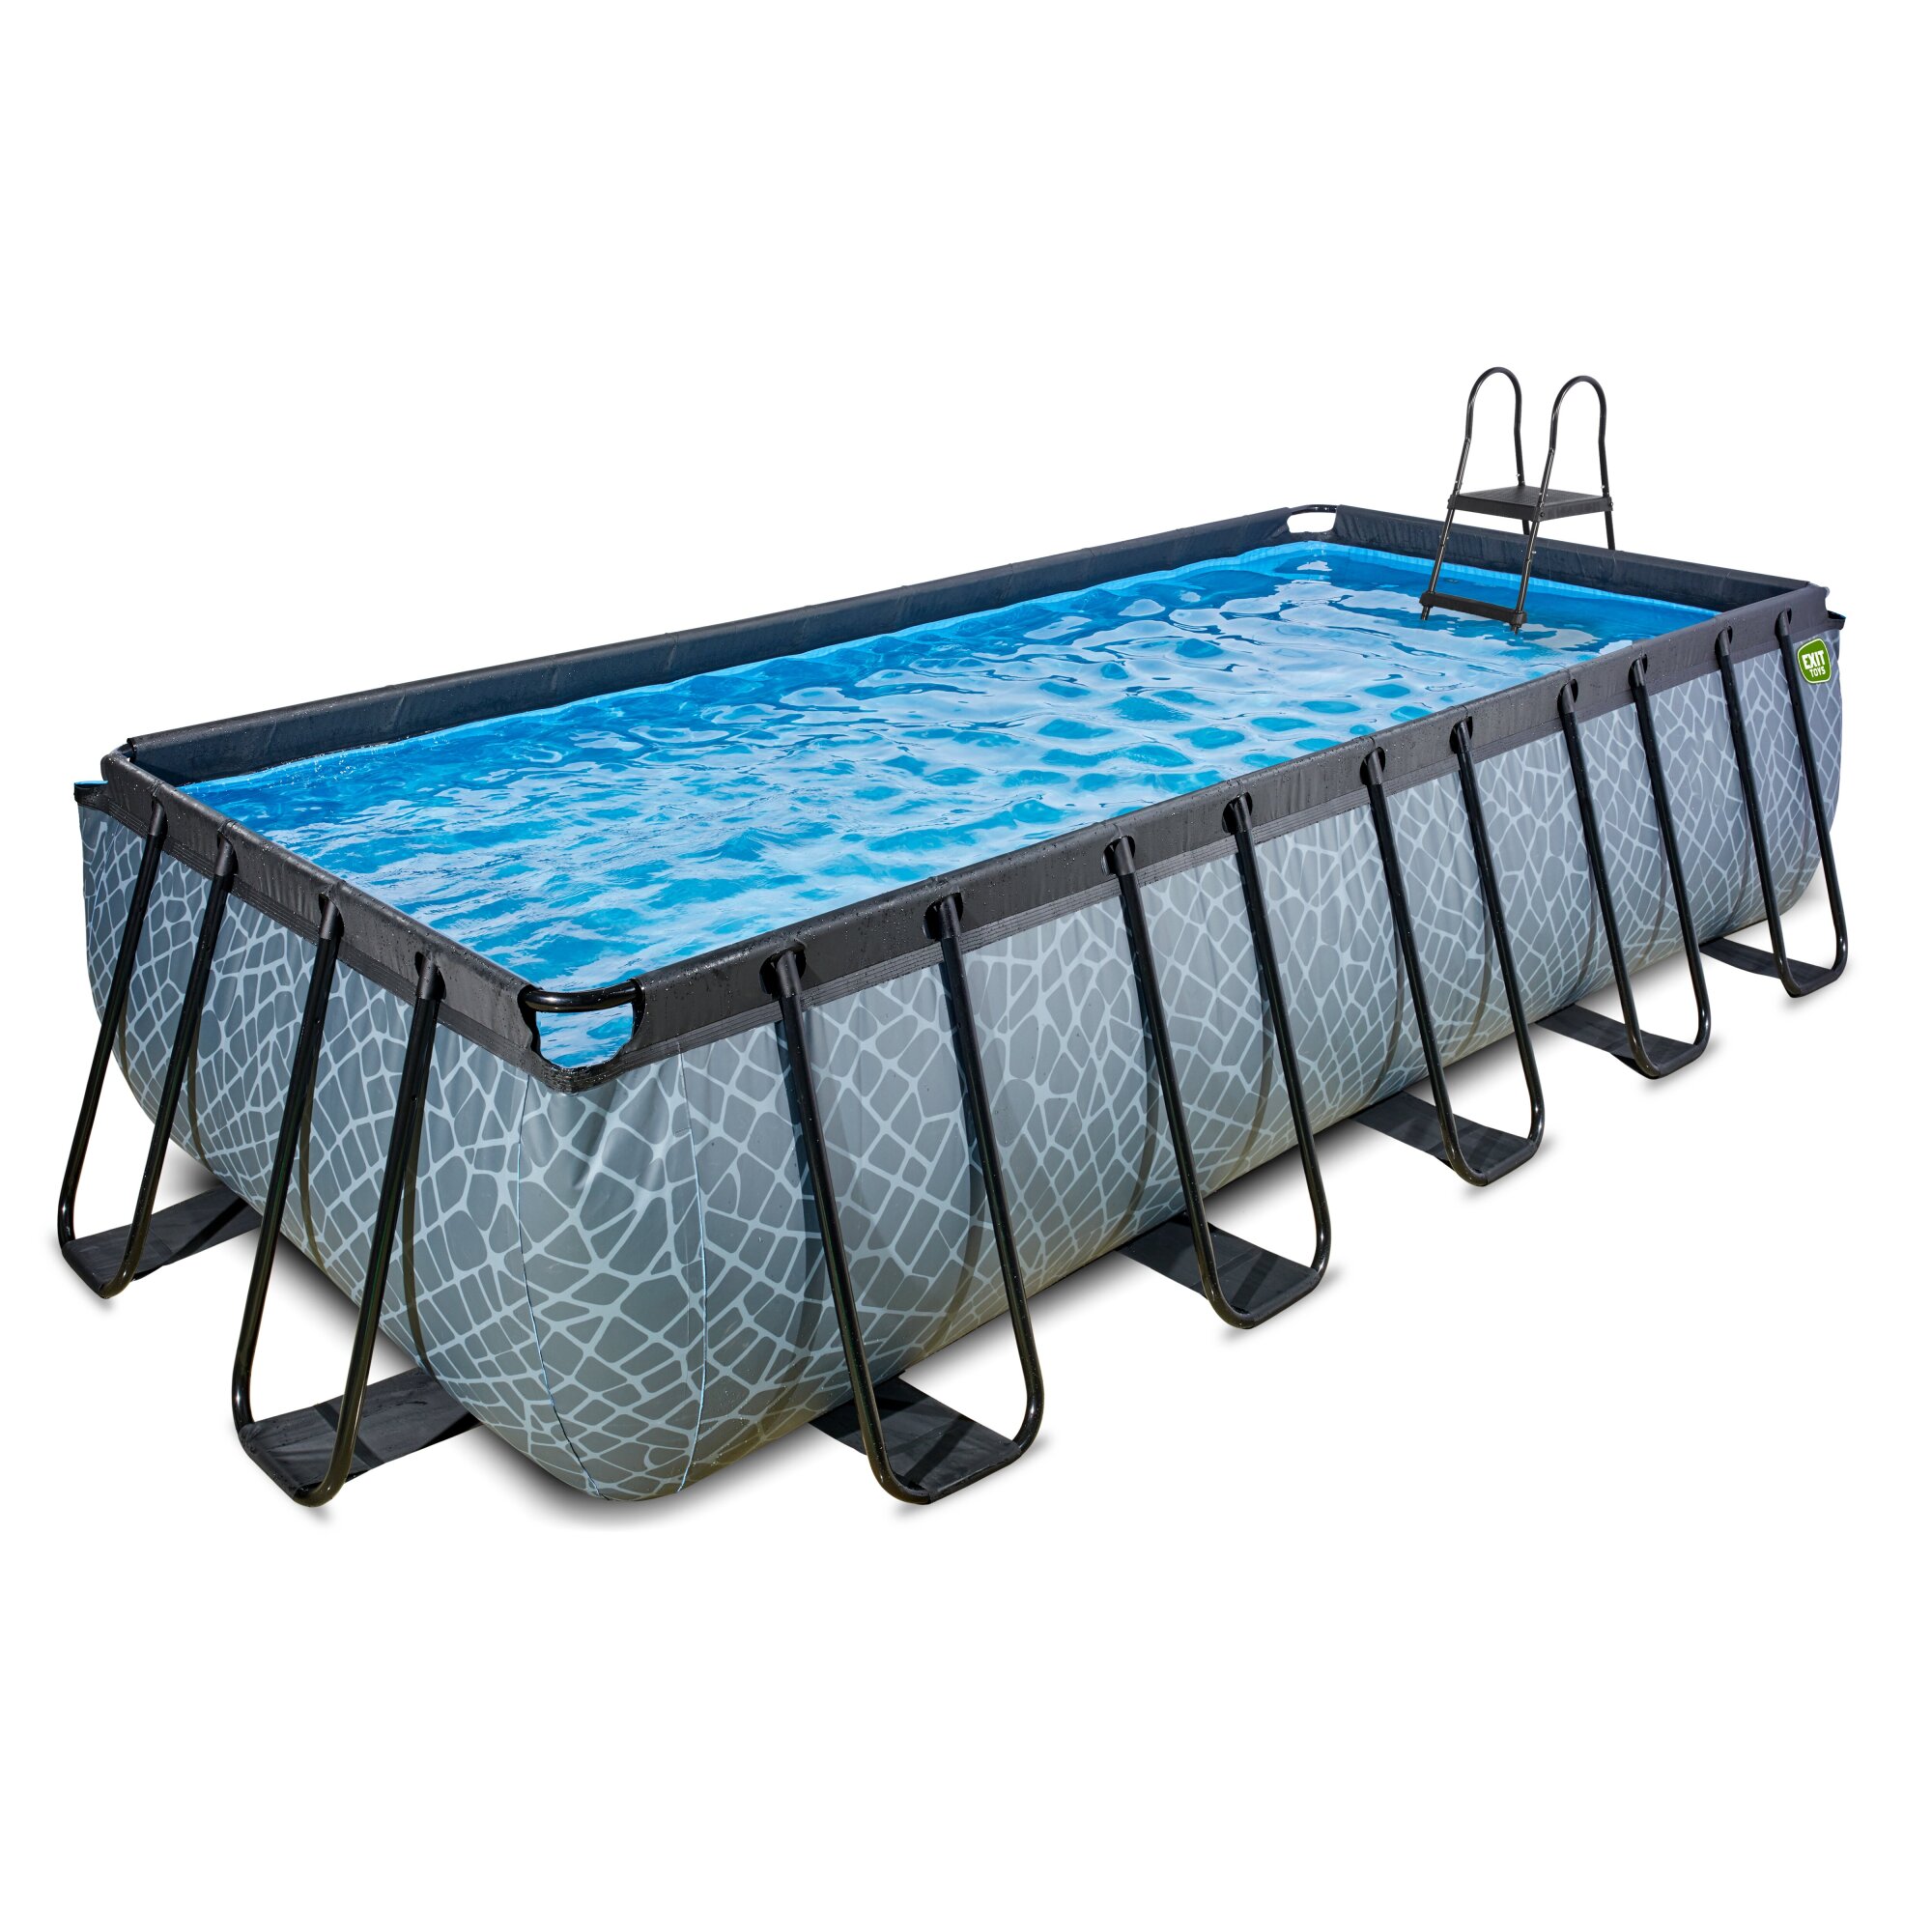 EXIT Stone pool 540x250x122cm with sand filter pump - grey